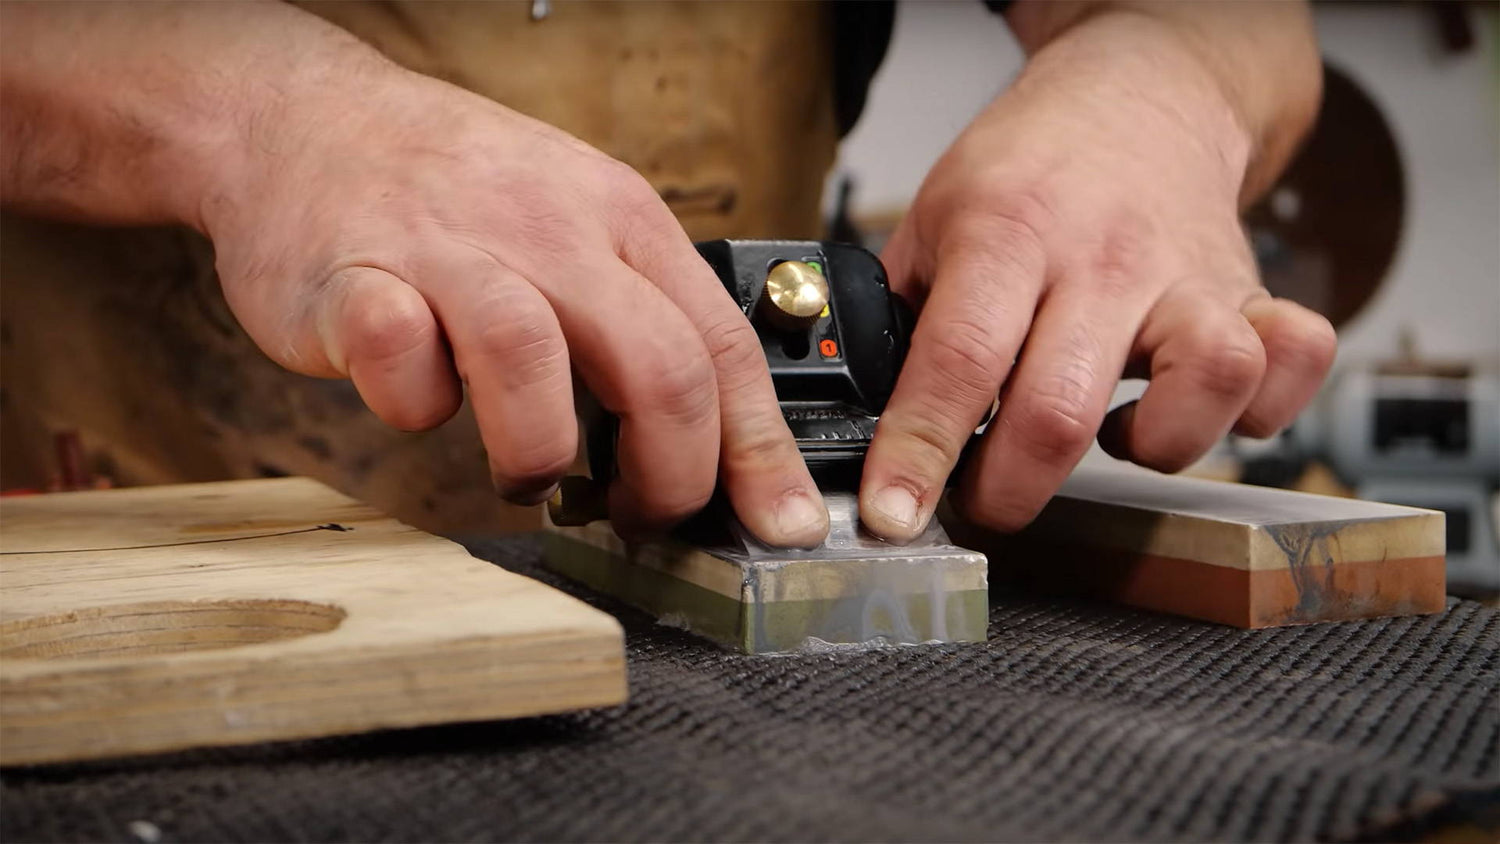 5 Tips for Sharpening a Hand Plane Blade: How to Hone a Razor Sharp Edge